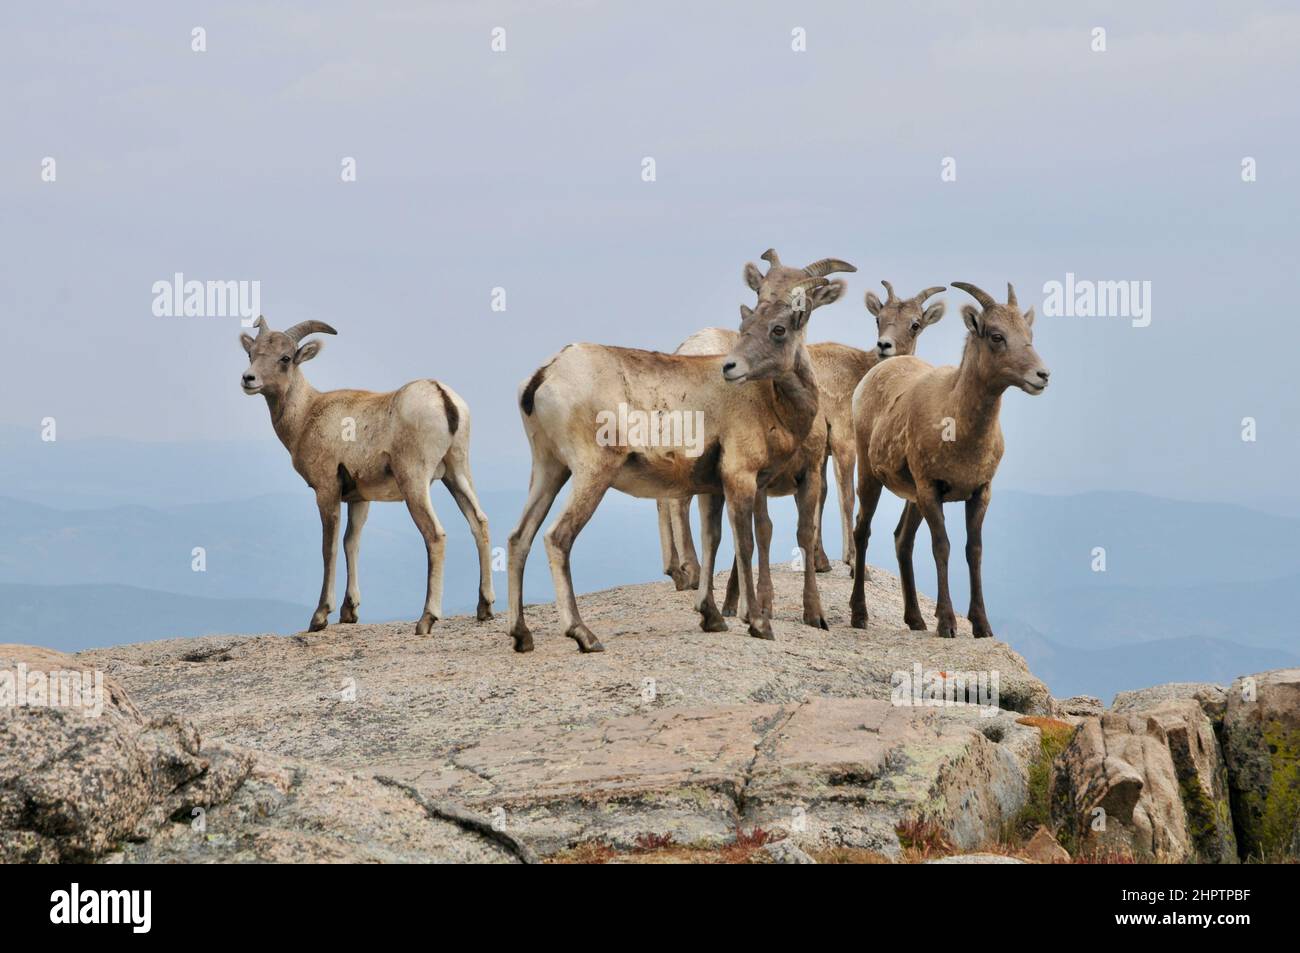 Wild Mountain Goats or Rocky Mountain goat, Along the Rocks and Mountain Sides of the Colorado Rocky Mountains in the United States Stock Photo